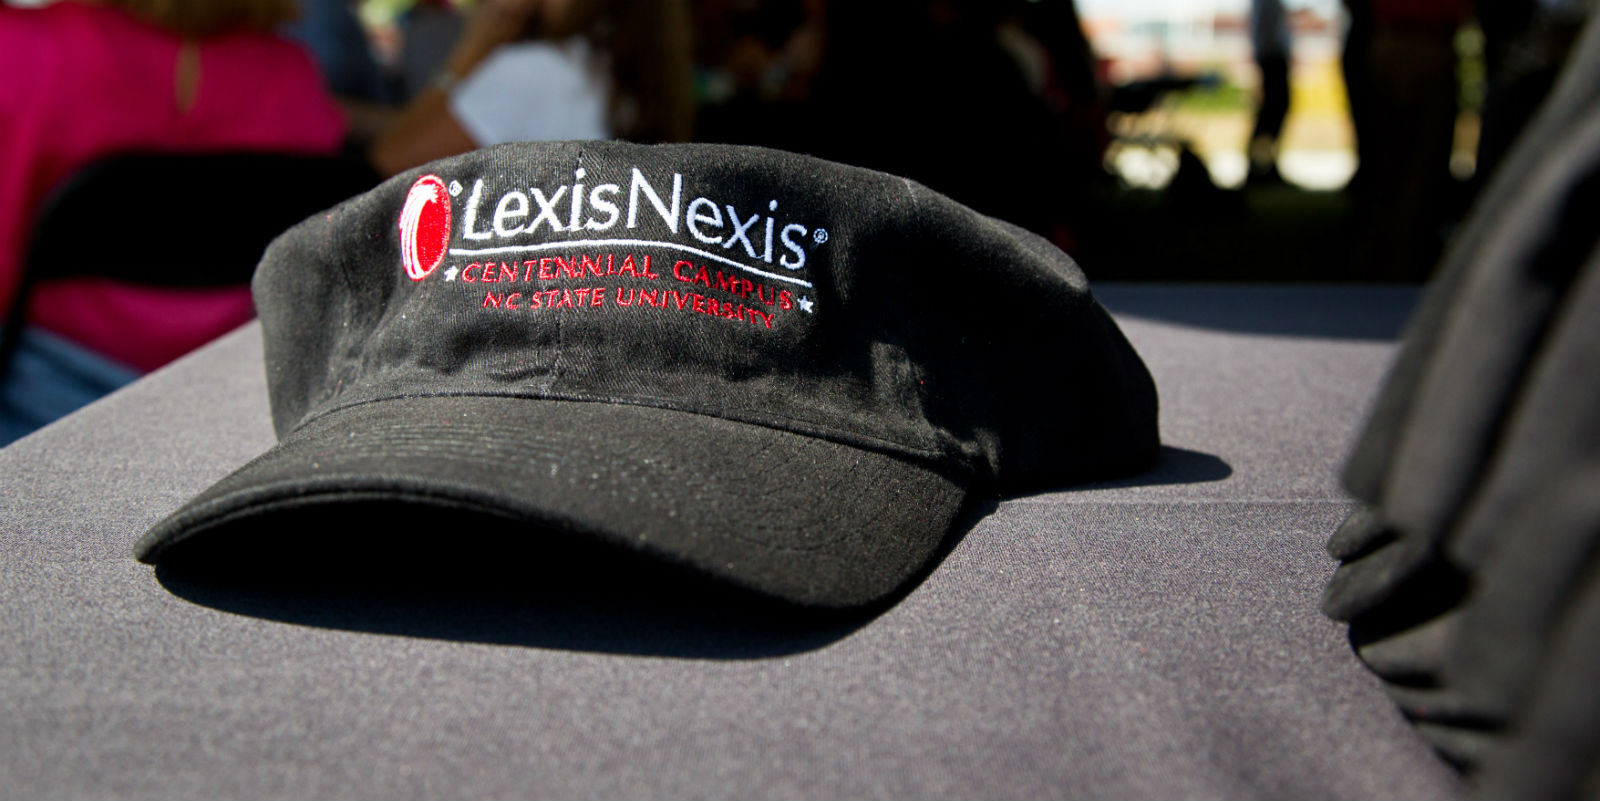 The LexisNexis software division is headquartered on NC State's Centennial Campus